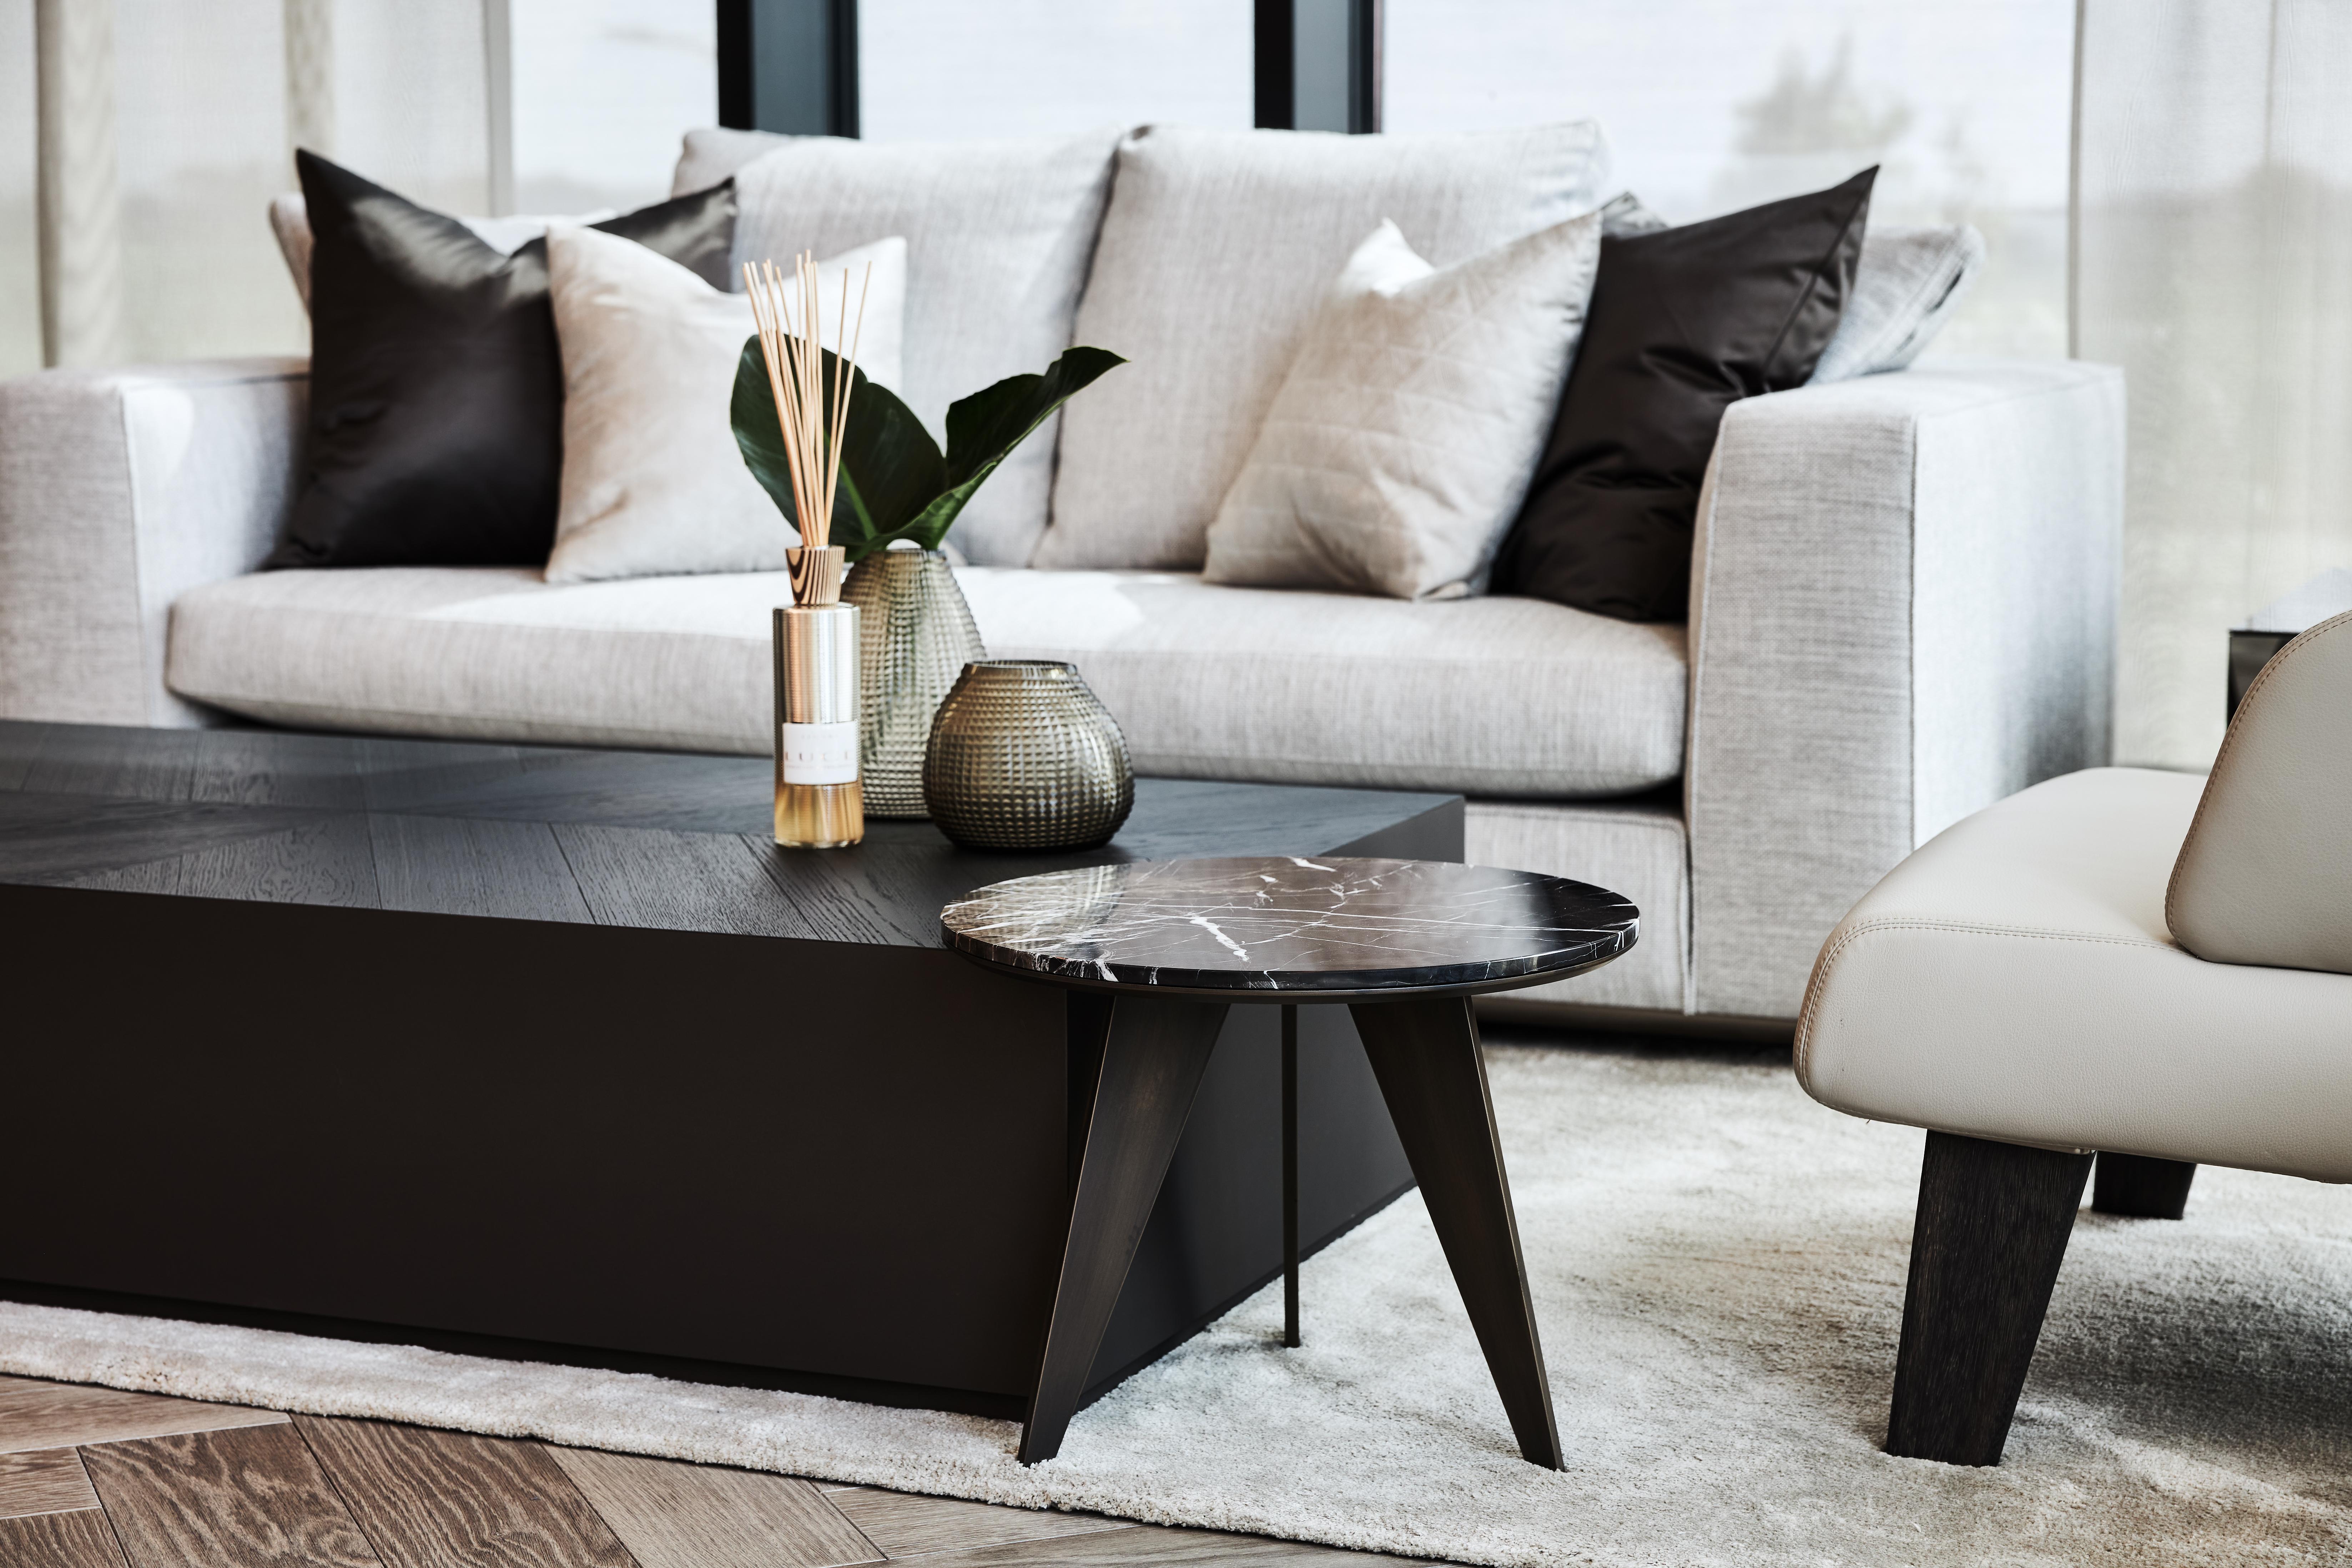 Basalt: The Basalt has a wooden base which is painted with a soft touch lacquer. The top is brushed oak. The artisan expertise make the design.

The basalt coffee table is characterized by its beautiful dark brushed oak top, laid in Hungarian